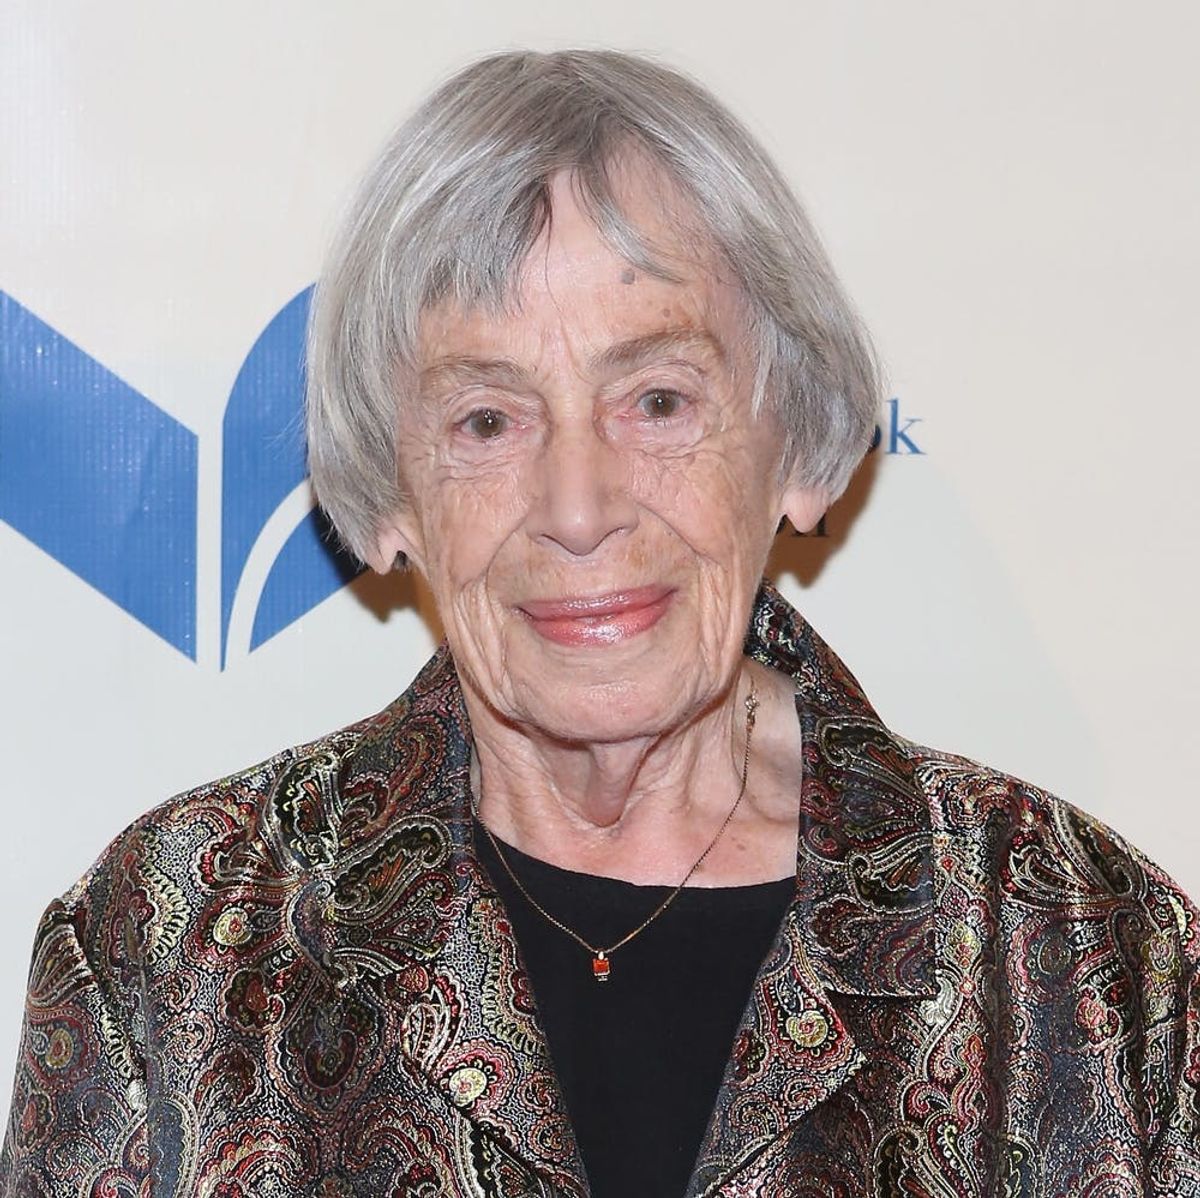 Sci-Fi Feminist Trailblazer Ursula K. Le Guin Has Died, and We Owe Her a Lot